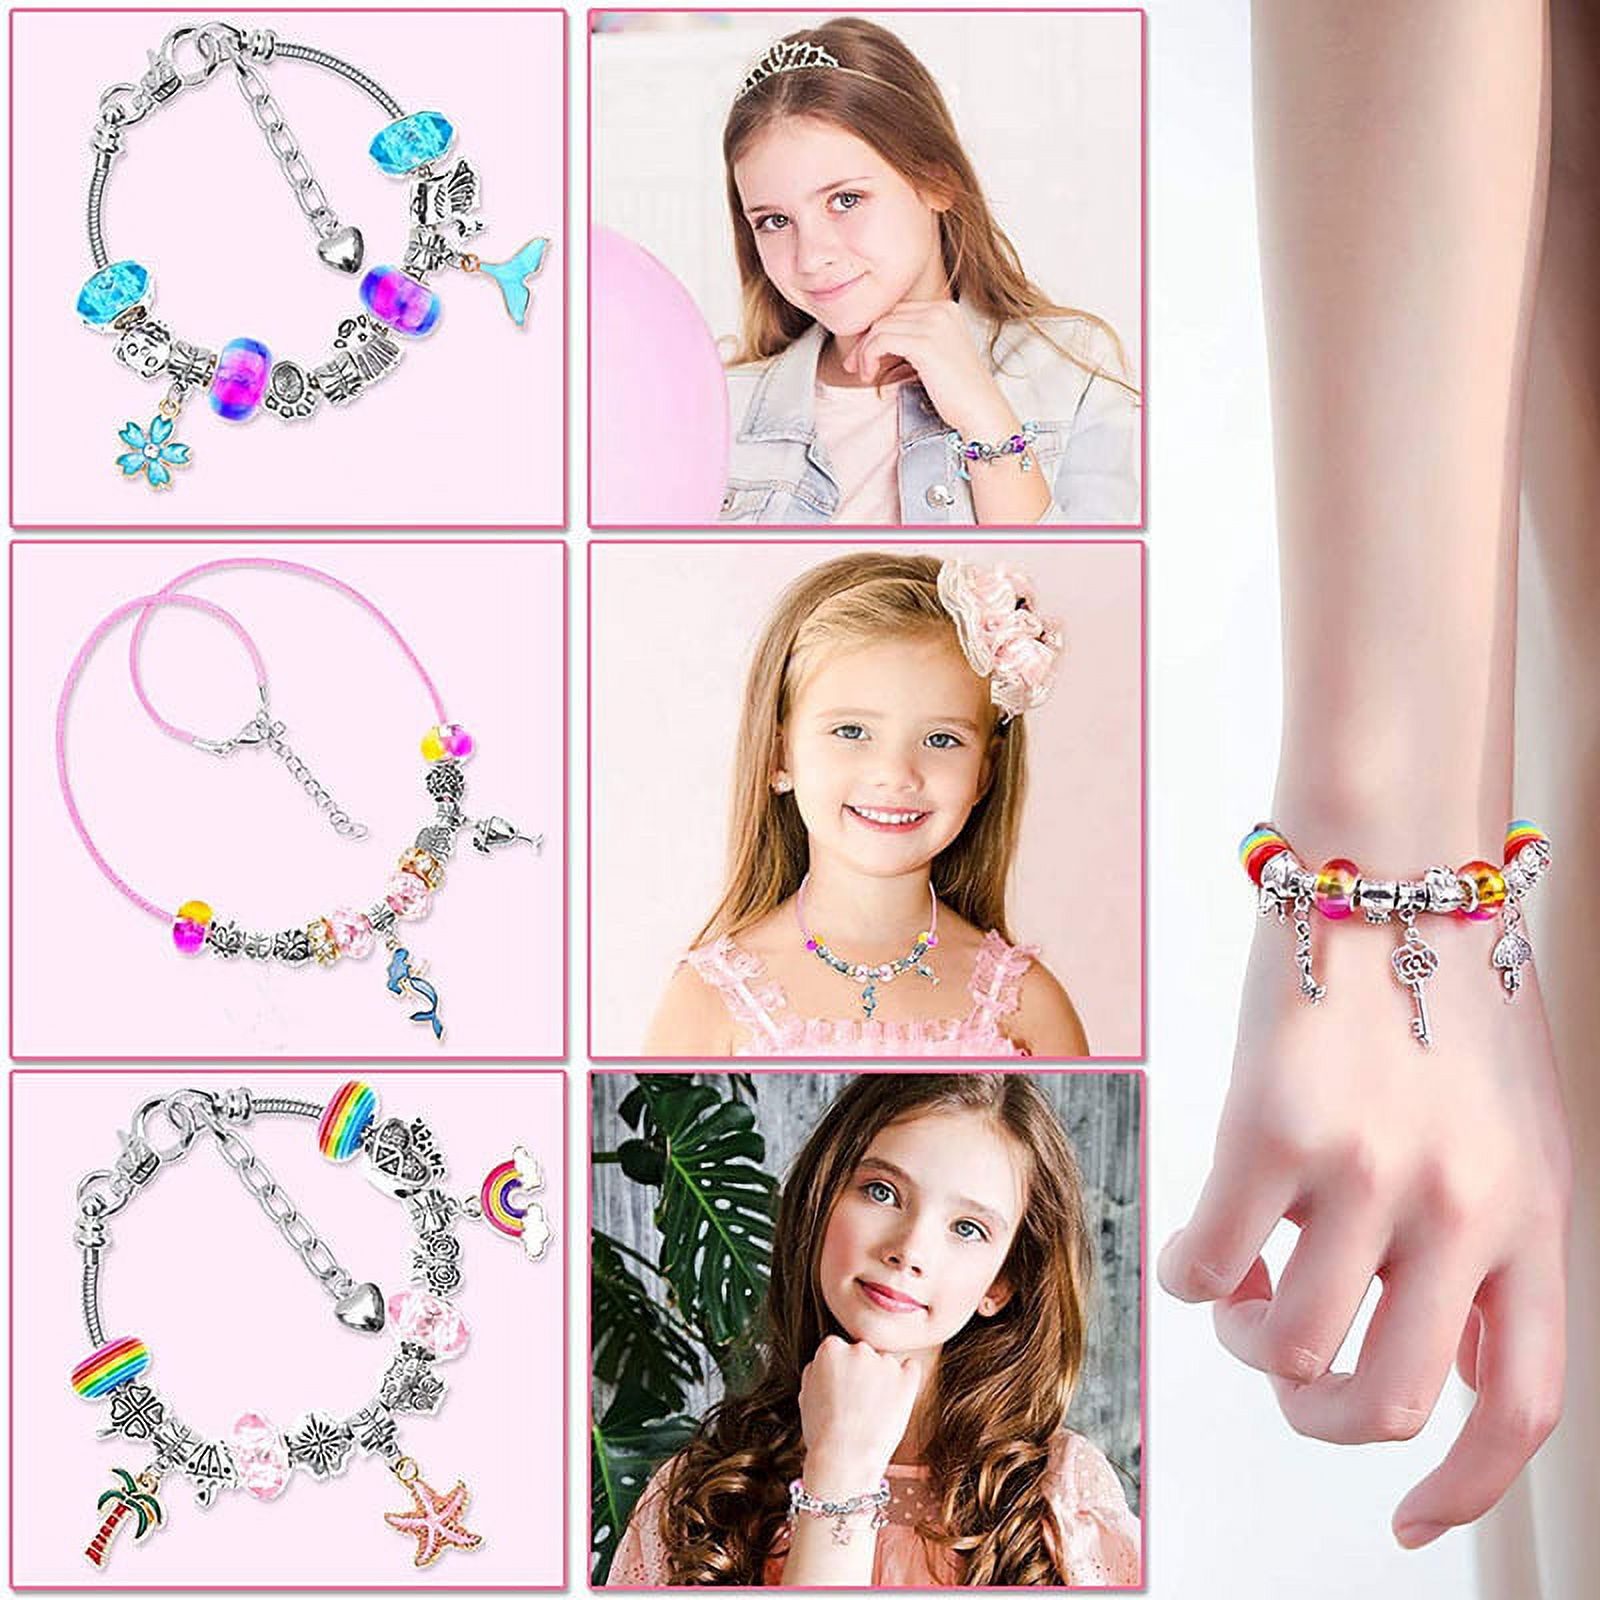 112 Pcs DIY Jewelry Making Kit with Bracelet,Pendant,Beads,Charms and  Necklace String - Charm Bracelet Making Kitfor Bracelets Craft & Necklace  Making, for Teen Girl Gifts Ages 8-12Y 